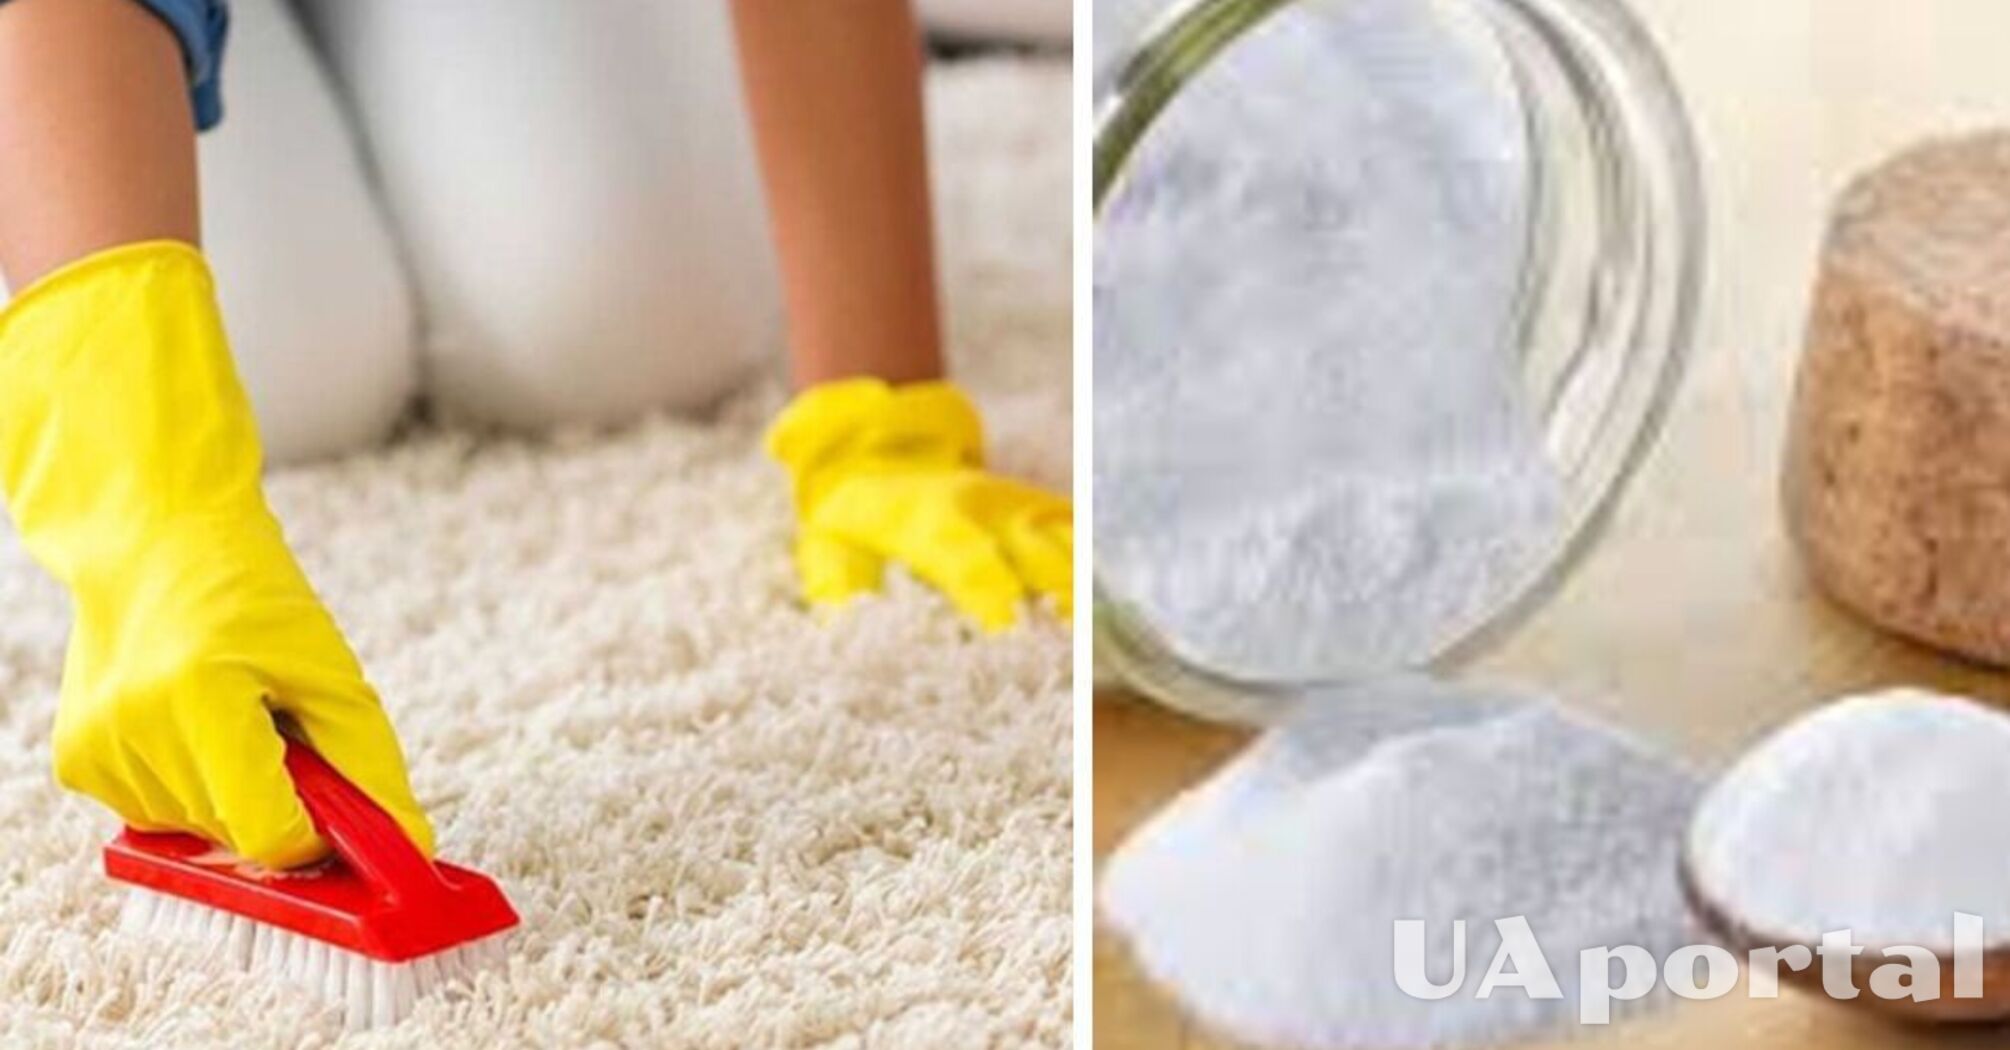 How to remove unpleasant odor from a carpet: an effective life hack